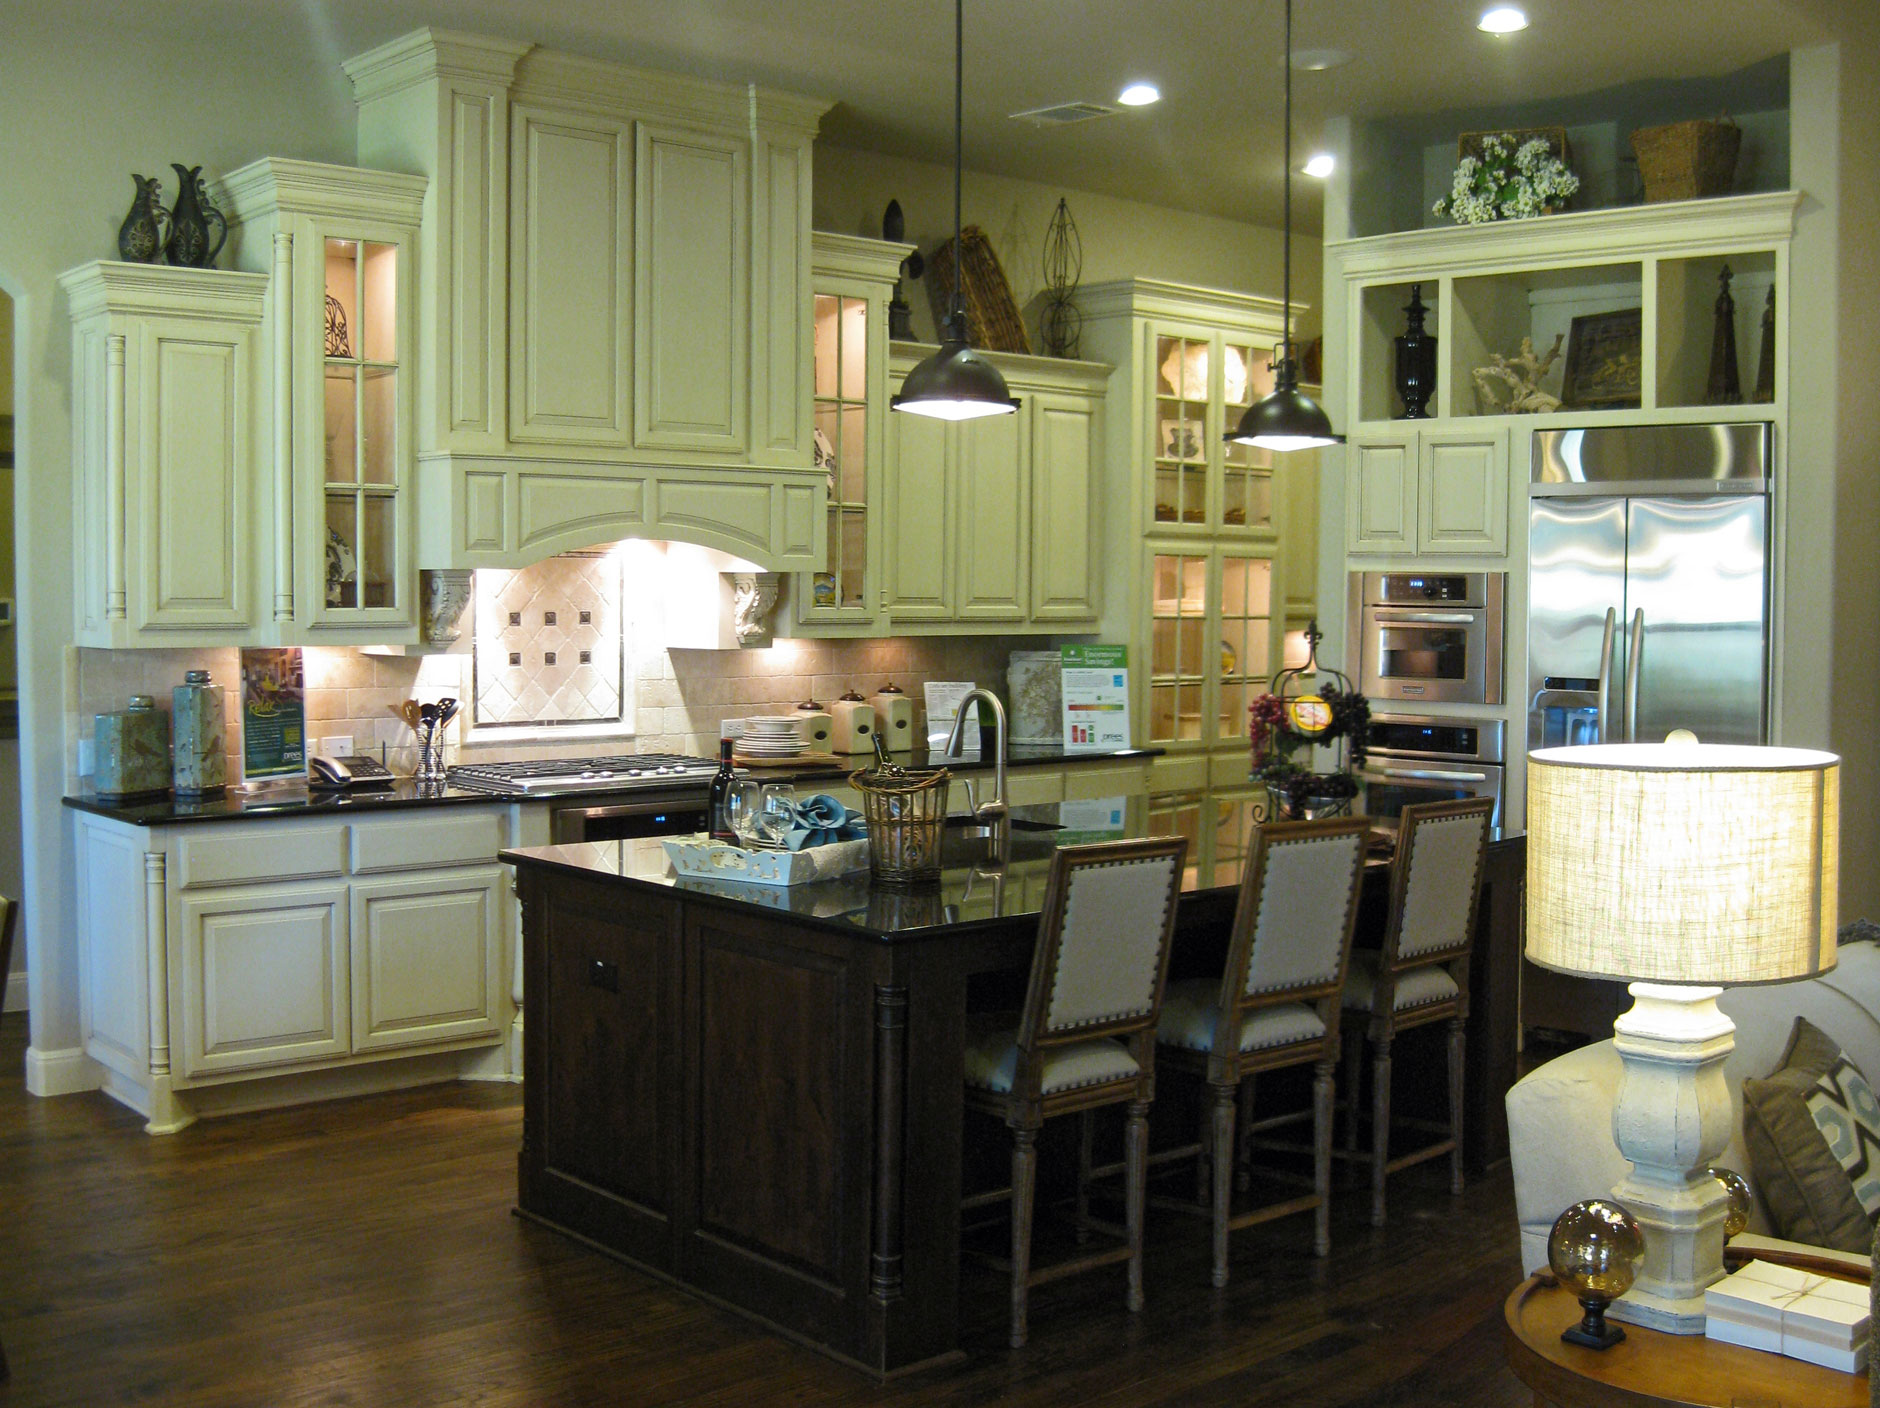 Burrows Cabinets kitchen cabinets with Elite vent hood in Bone with brown glaze